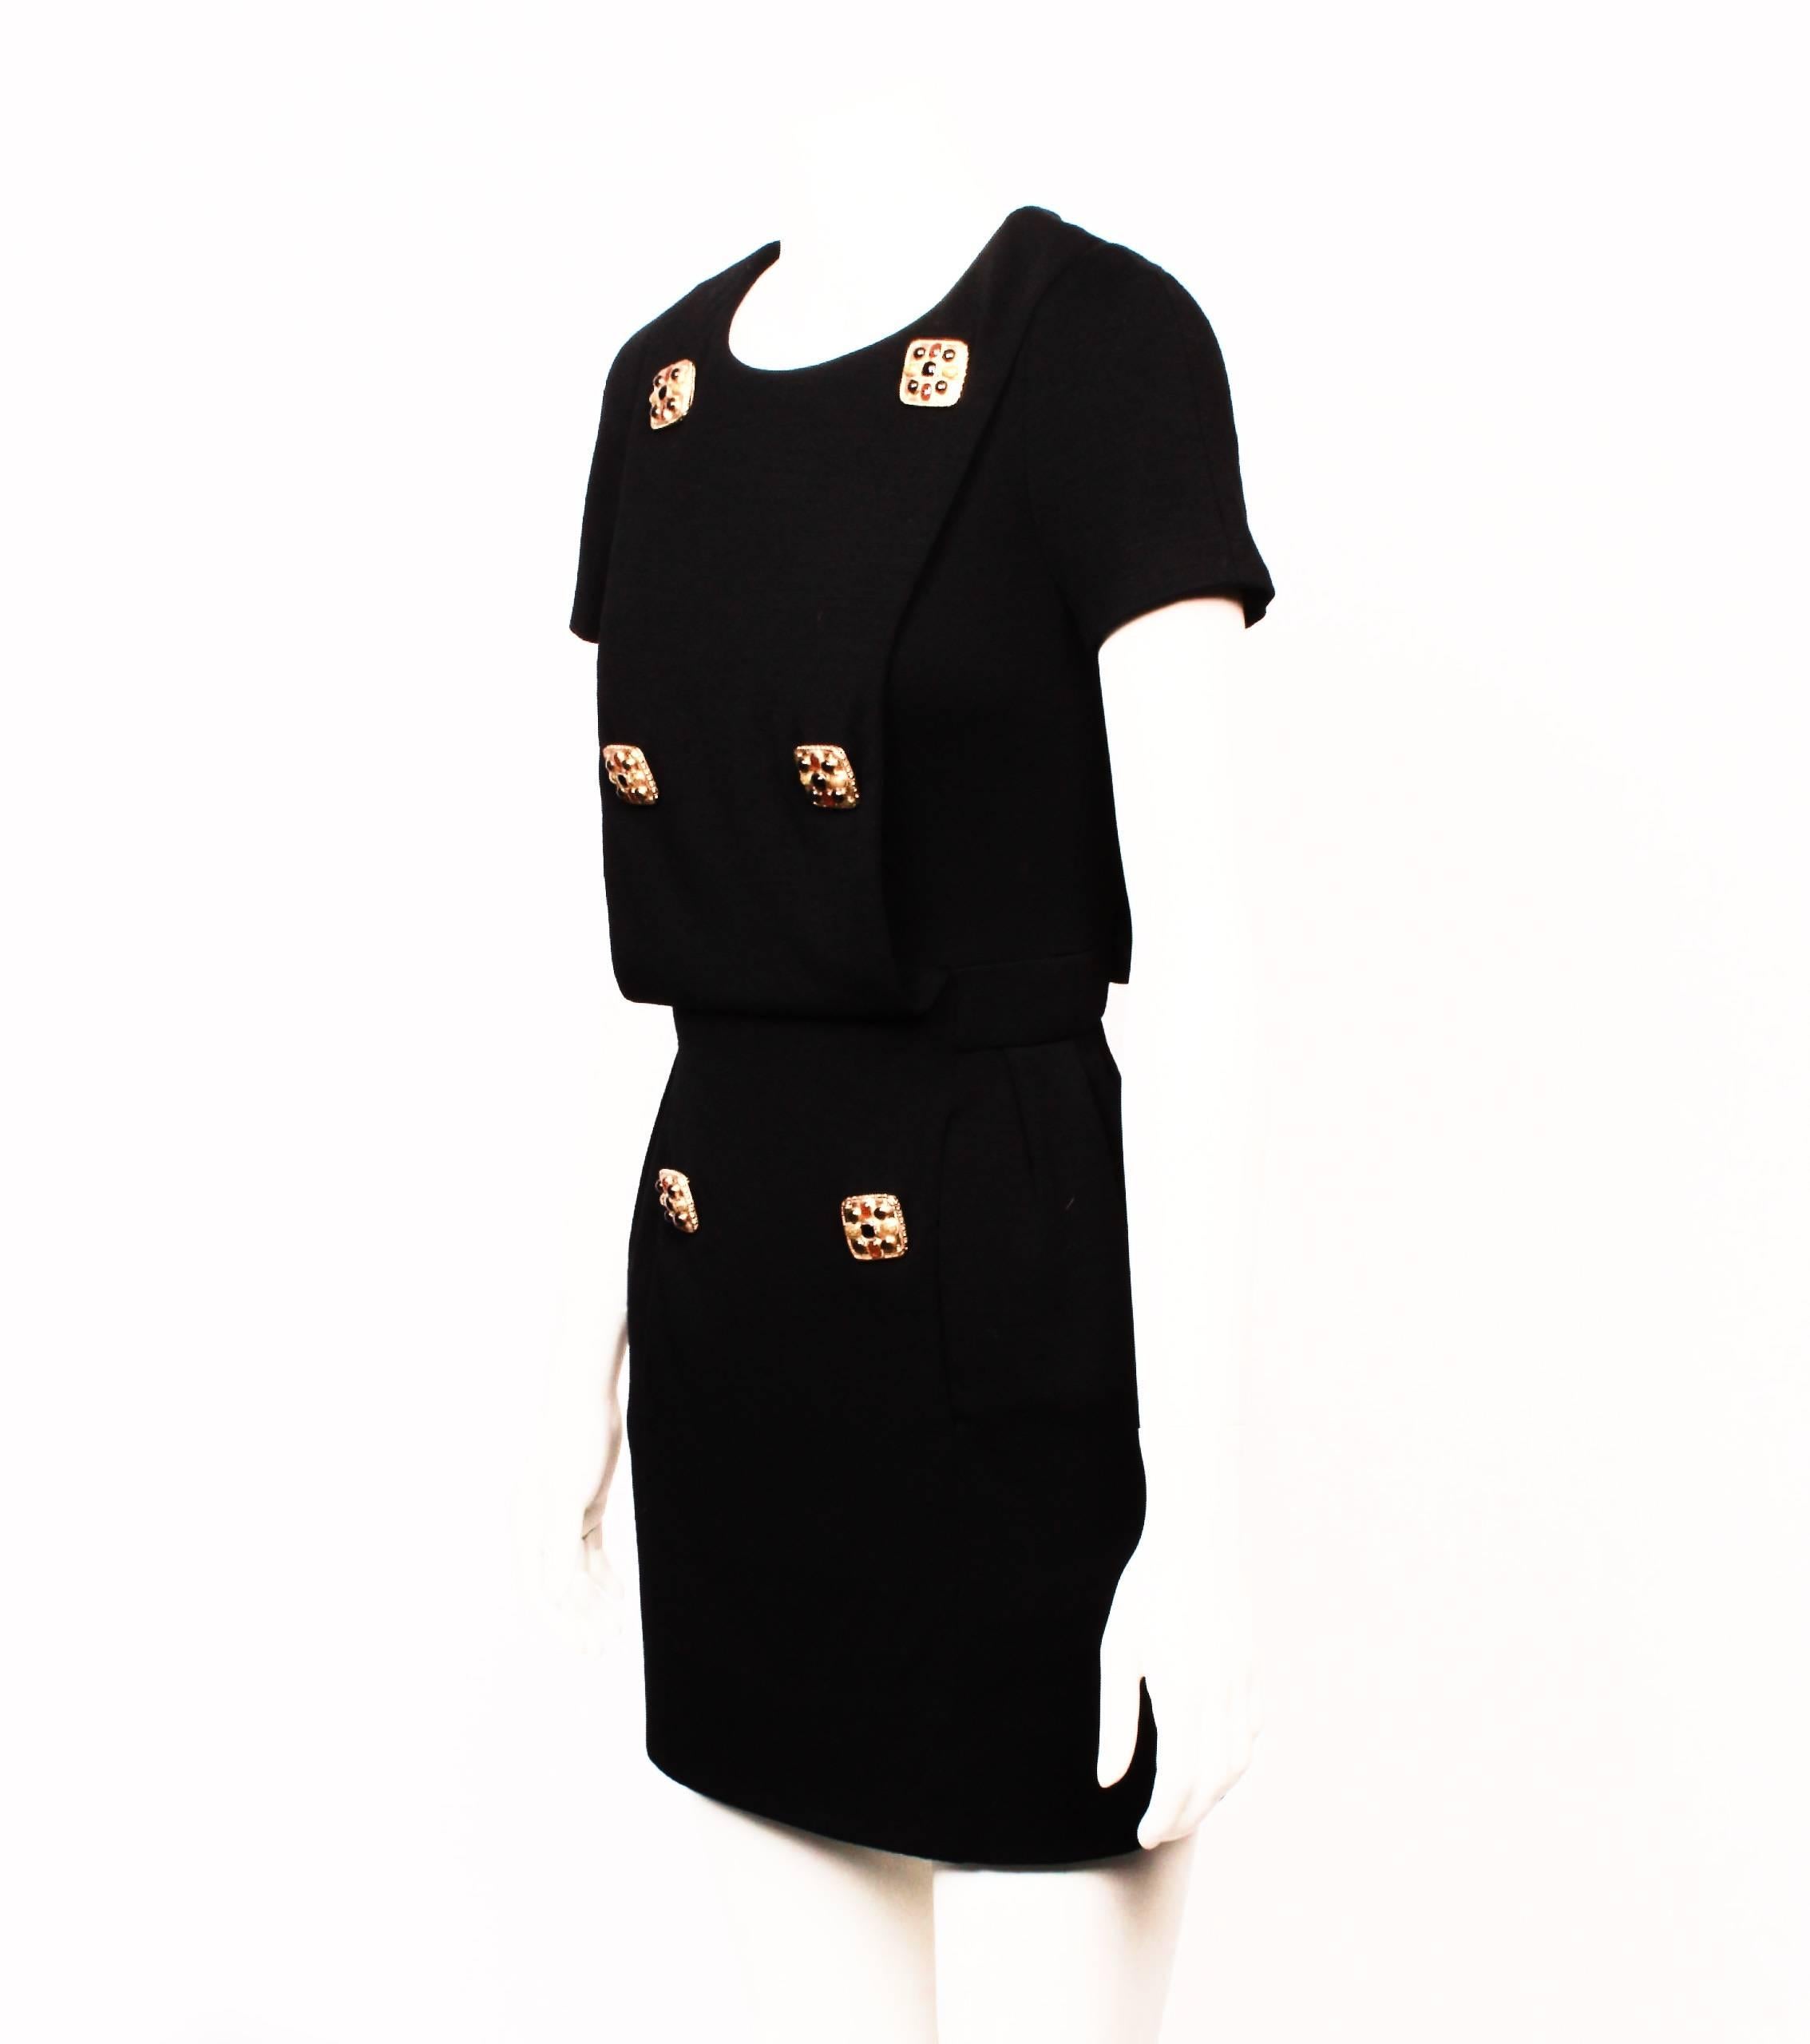 CHANEL black wool jersey short sleeve mini dress with ornate jewelled buttons. From Chanel's 2011 Pre-Fall Paris-Byzance Inspired Collection. 
Draped open panels at front and back. 
Front of dress is embellished with six gold-tone metal Byzantine